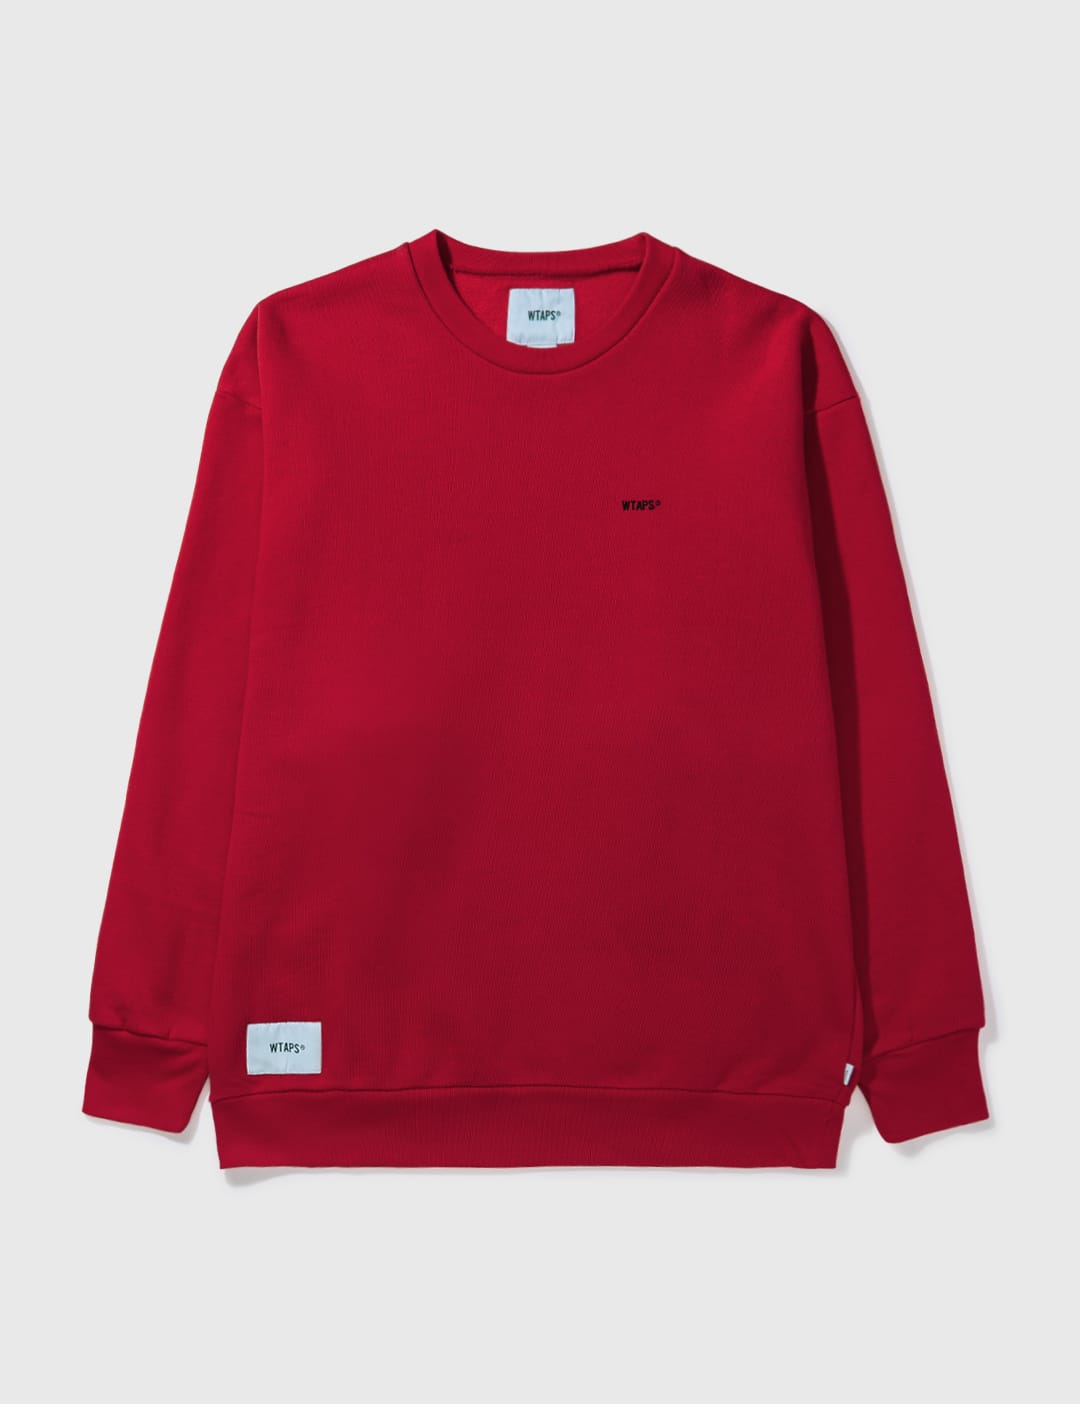 WTAPS - WTAPS RED PULLOVER SWEATER | HBX - Globally Curated